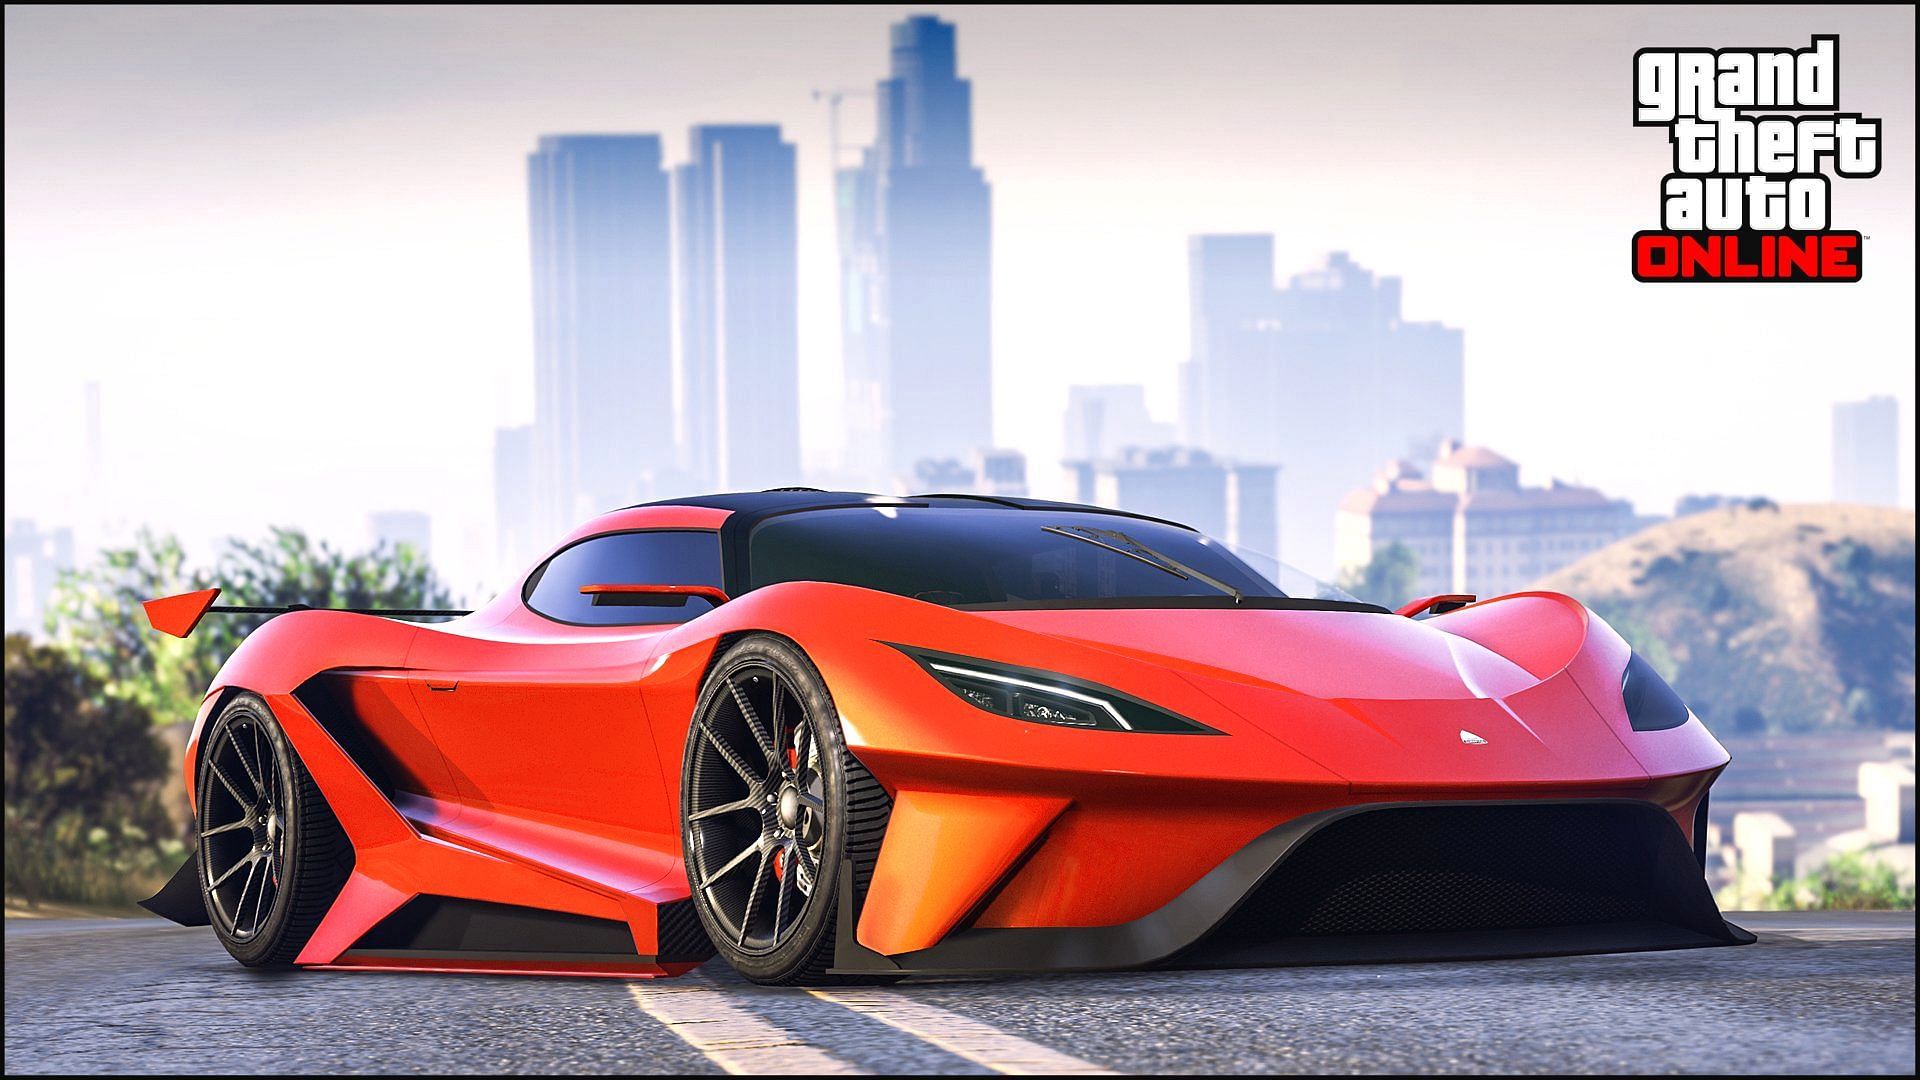 The Overflod Tyrant is available at a discount in GTA Online (Image via Rockstar Games)